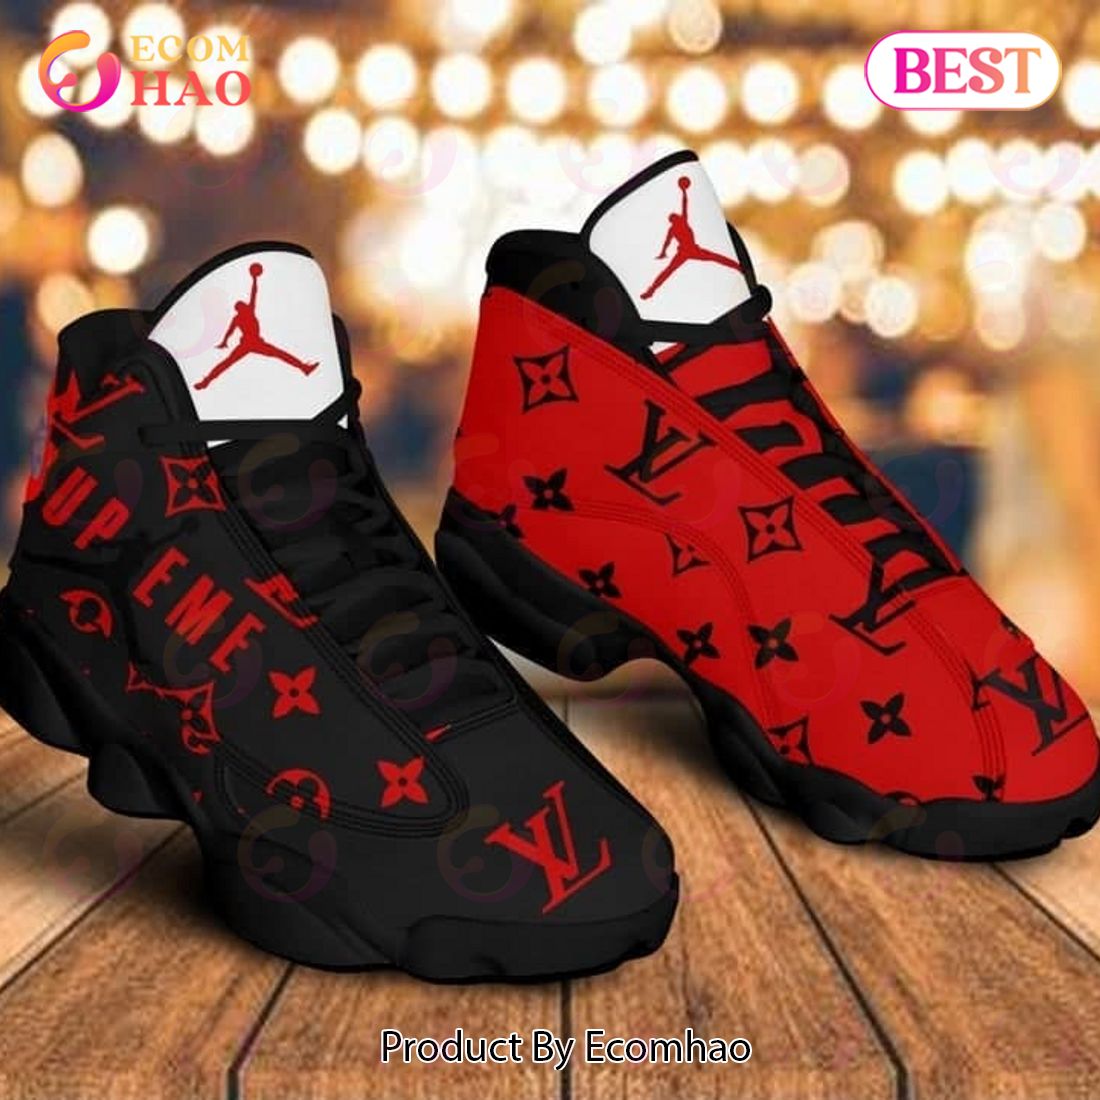 Louis Vuitton Mickey Mouse Air Jordan 13 LV Shoes, Sneakers - Ecomhao Store